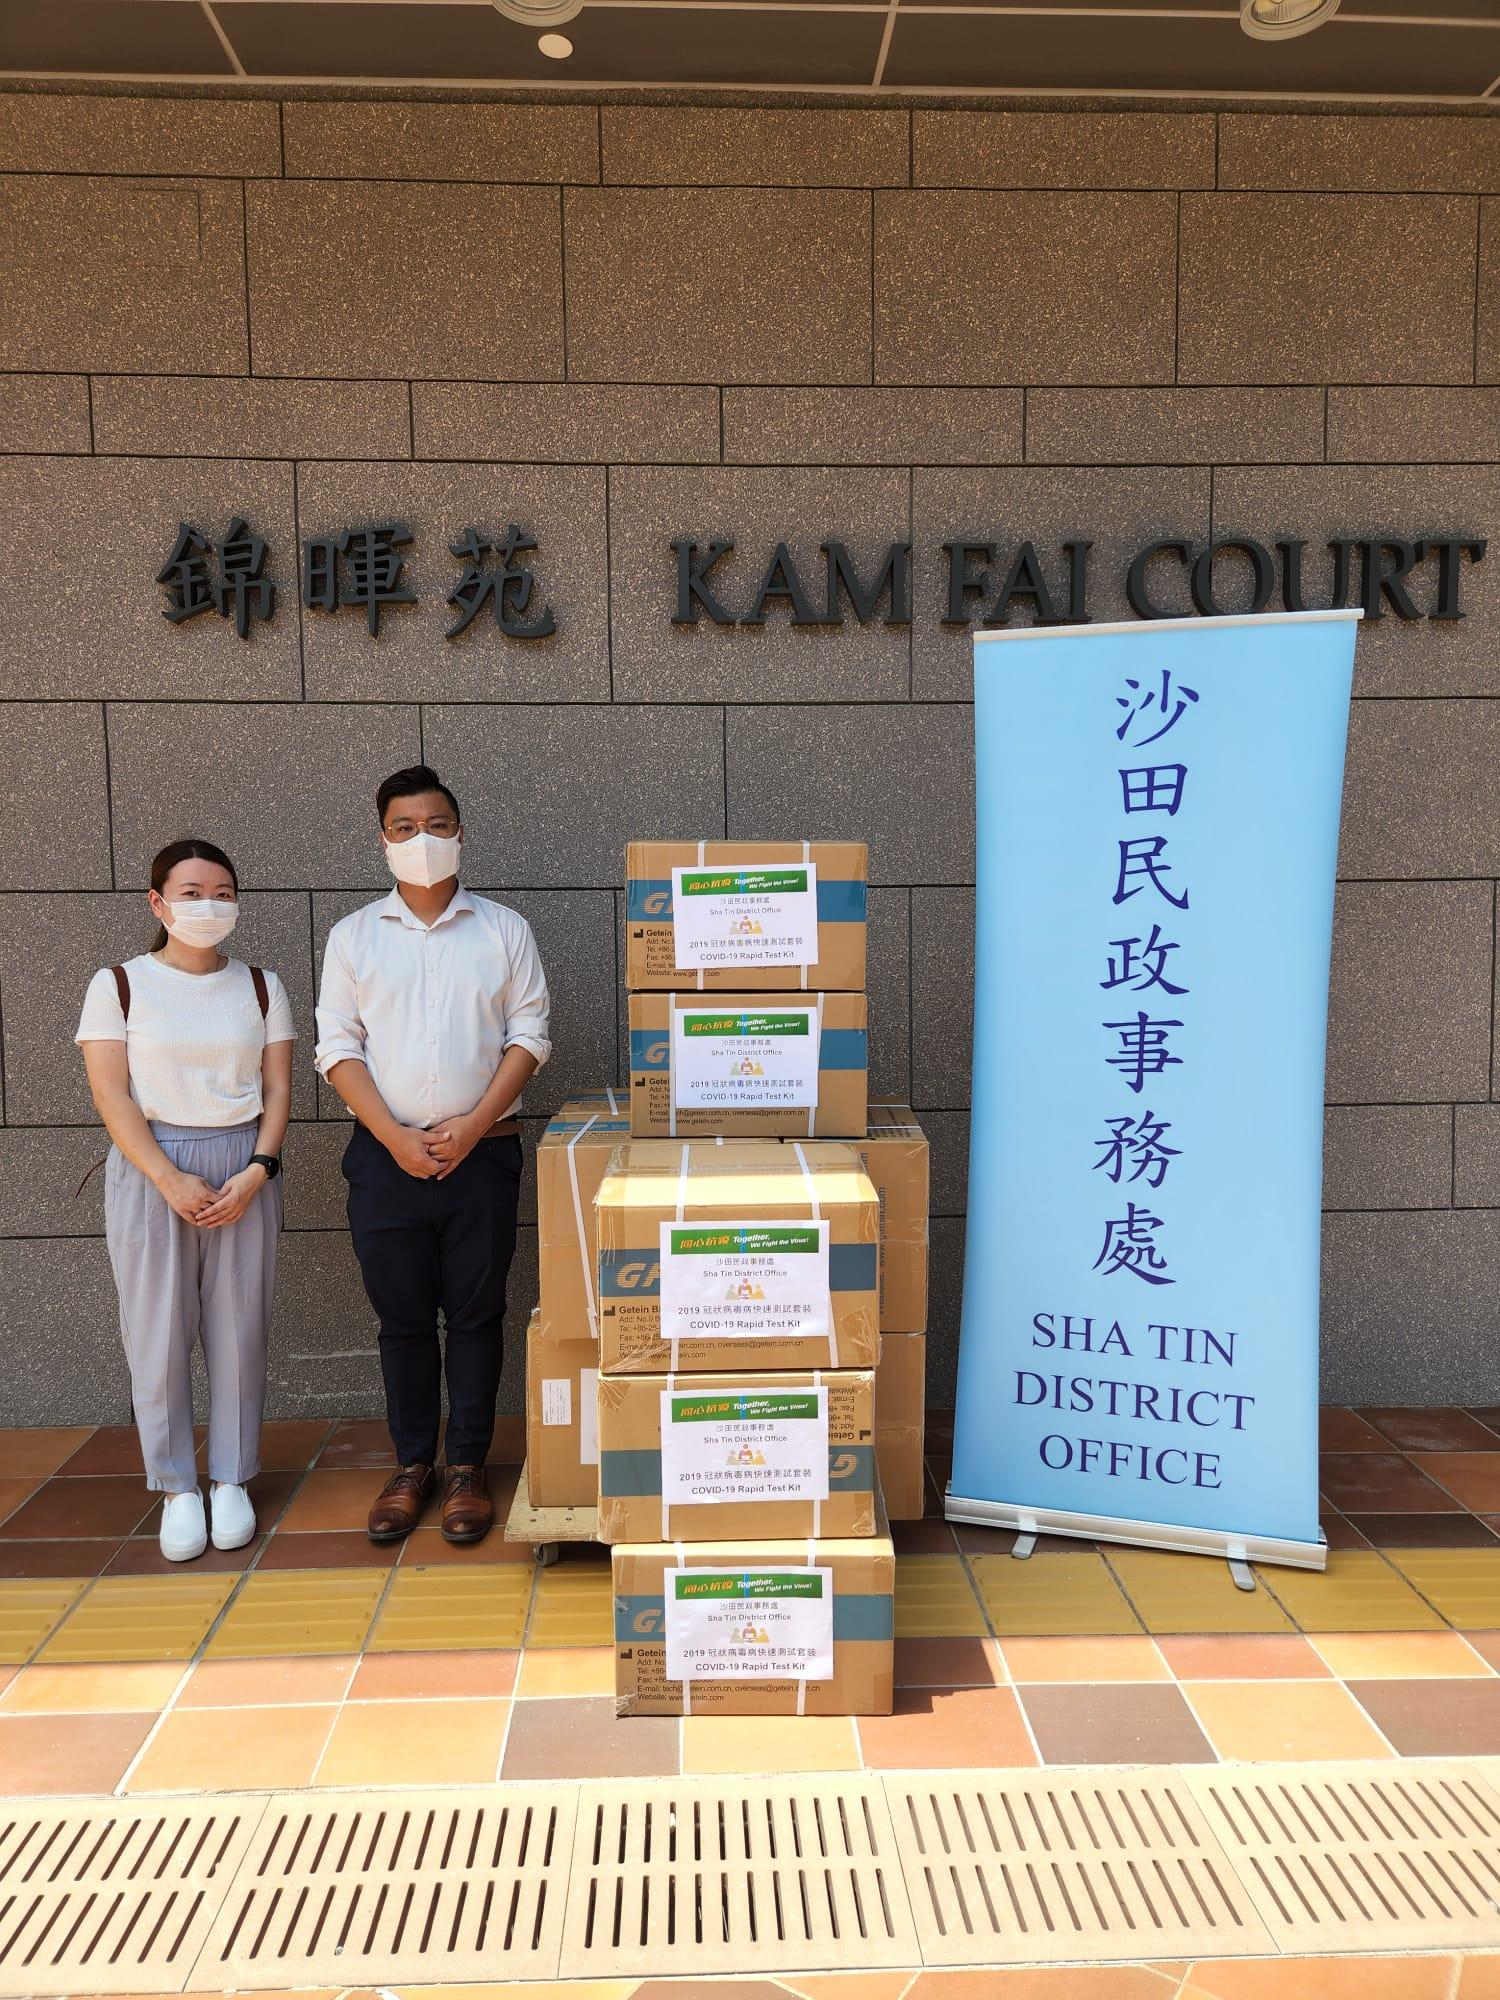 The Sha Tin District Office today (July 27) distributed COVID-19 rapid test kits to households, cleansing workers and property management staff living and working in Kam Fai Court for voluntary testing through the property management company.